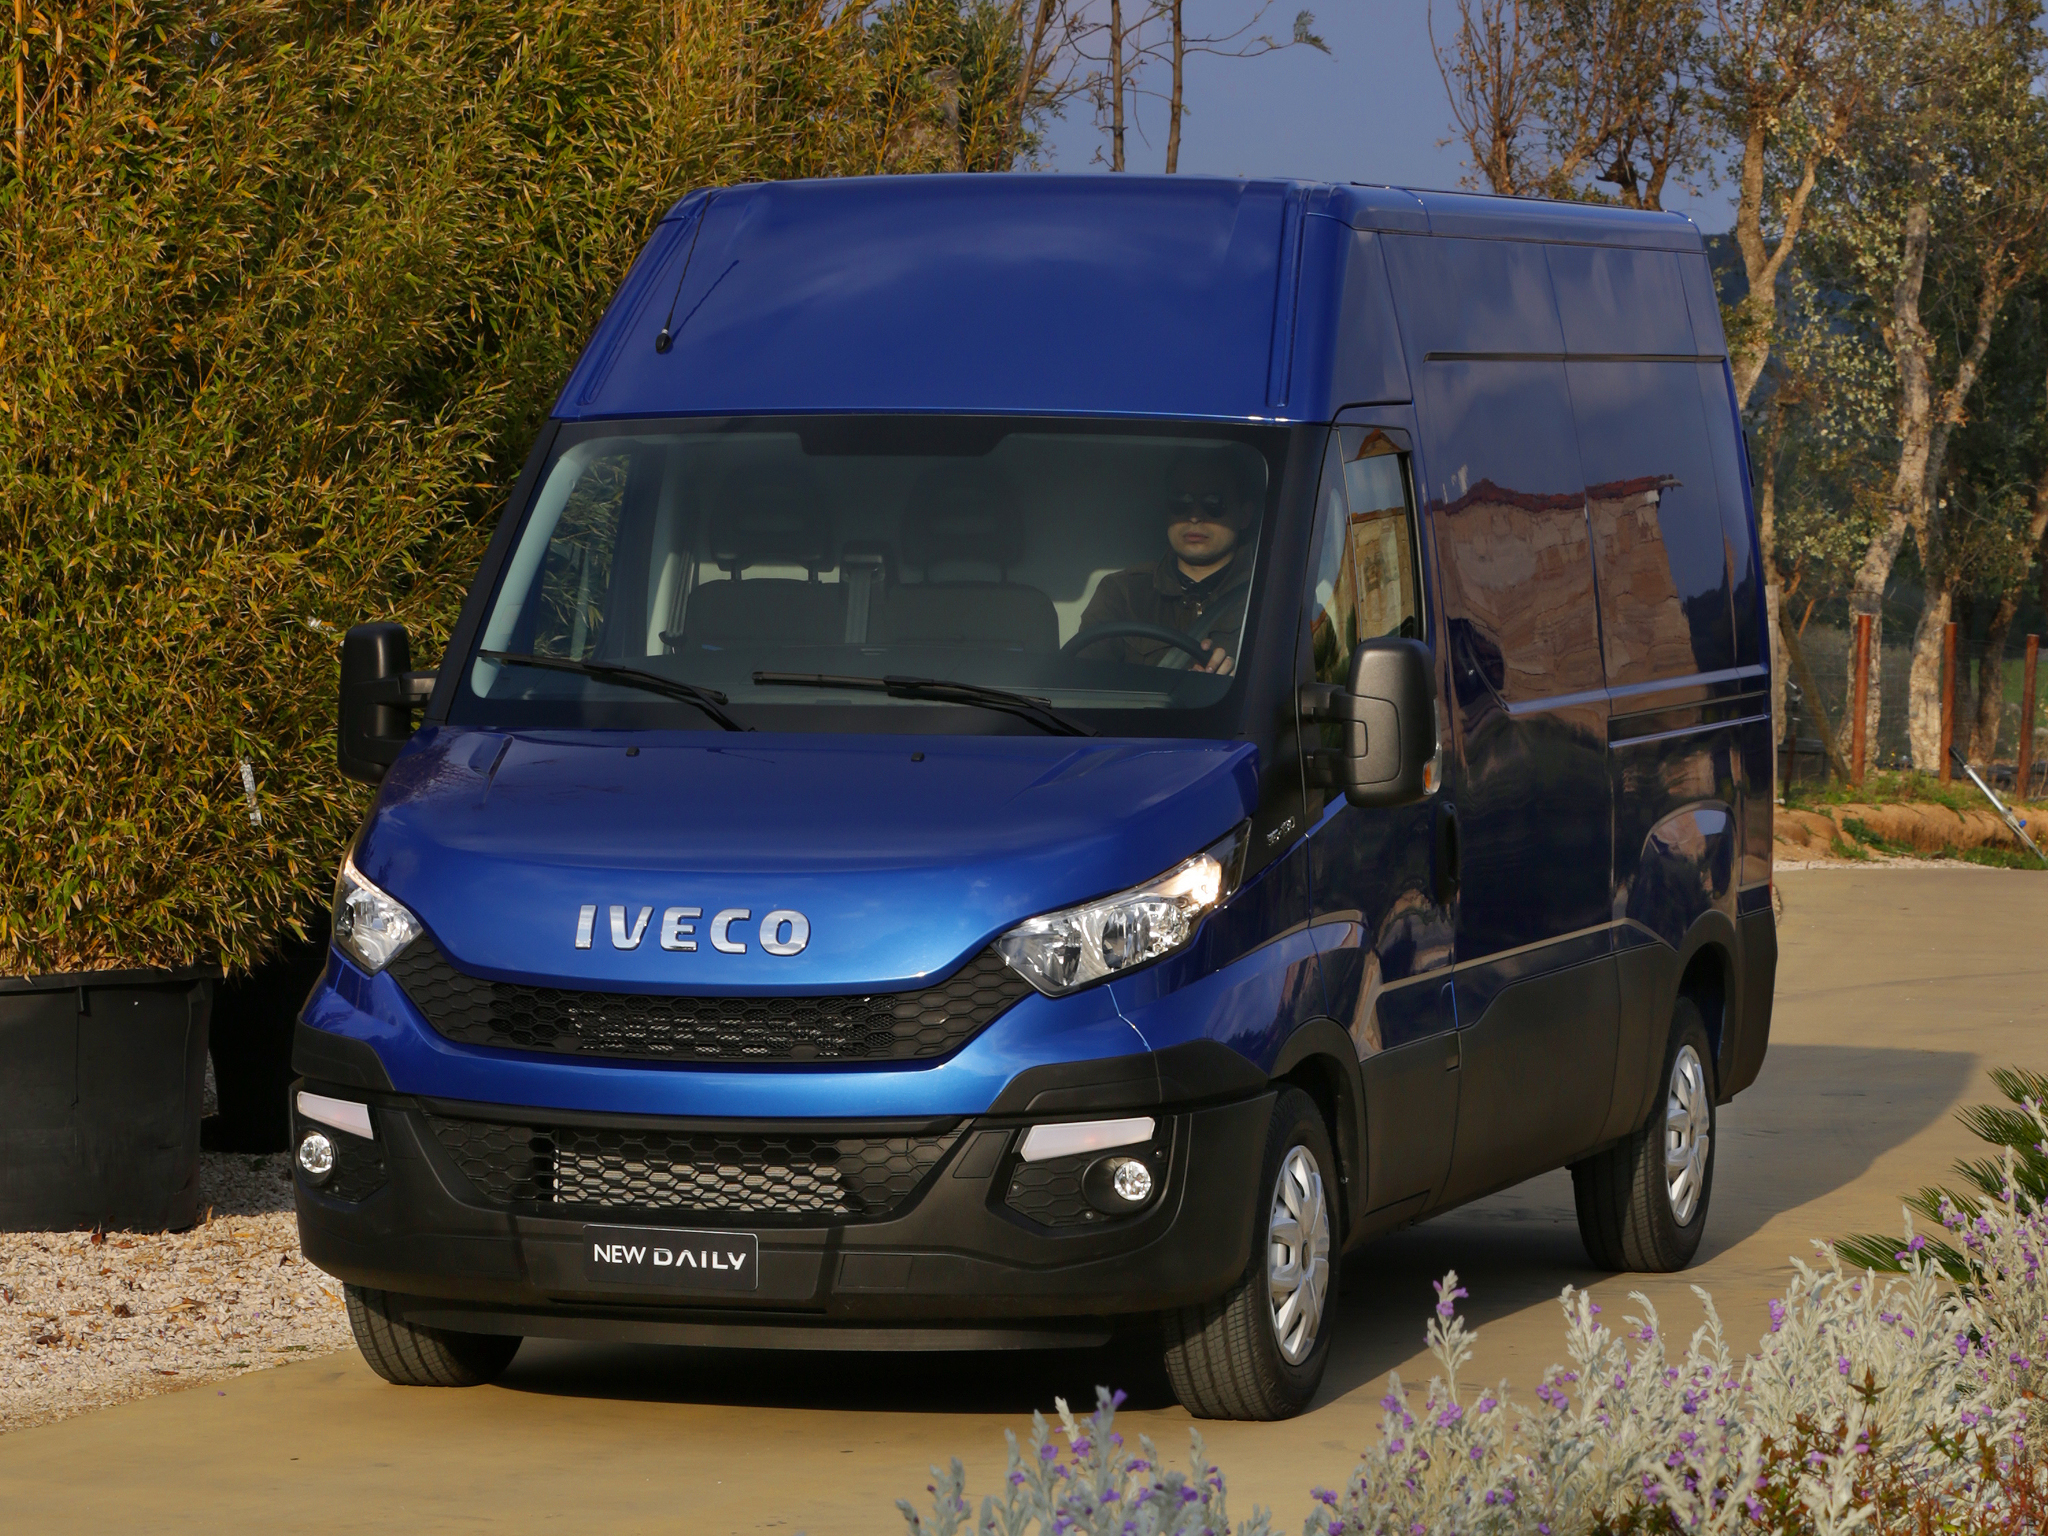 2020 Iveco Daily Features Redesigned Front Fascia 